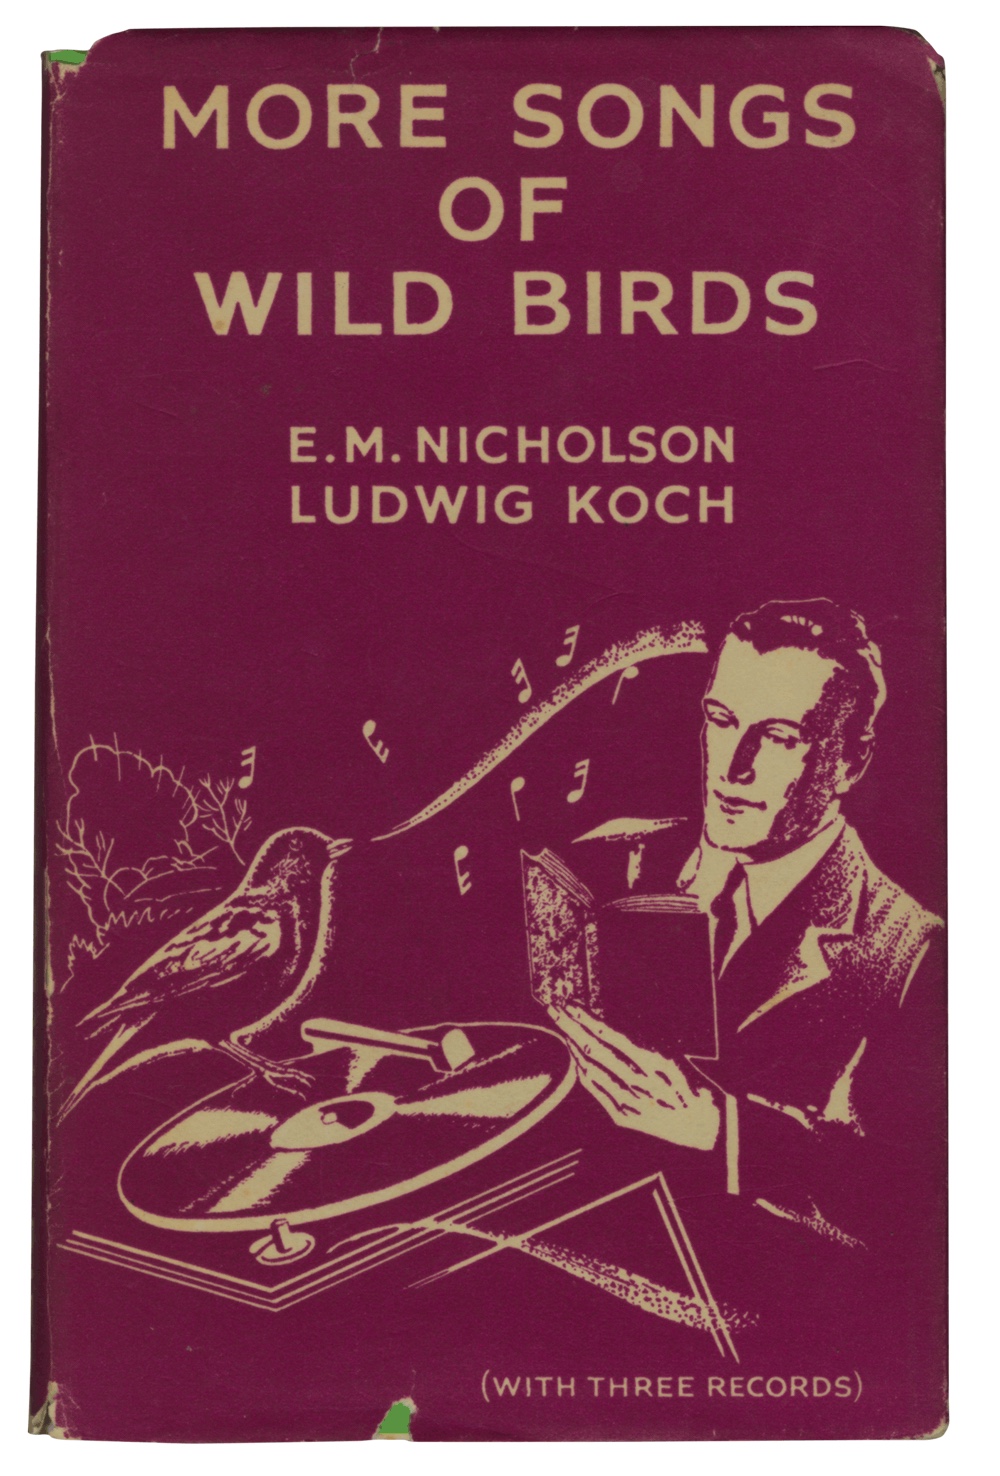 A photograph of the front cover of E.M. Nicholson and Ludwig Koch's nineteen thirty six 